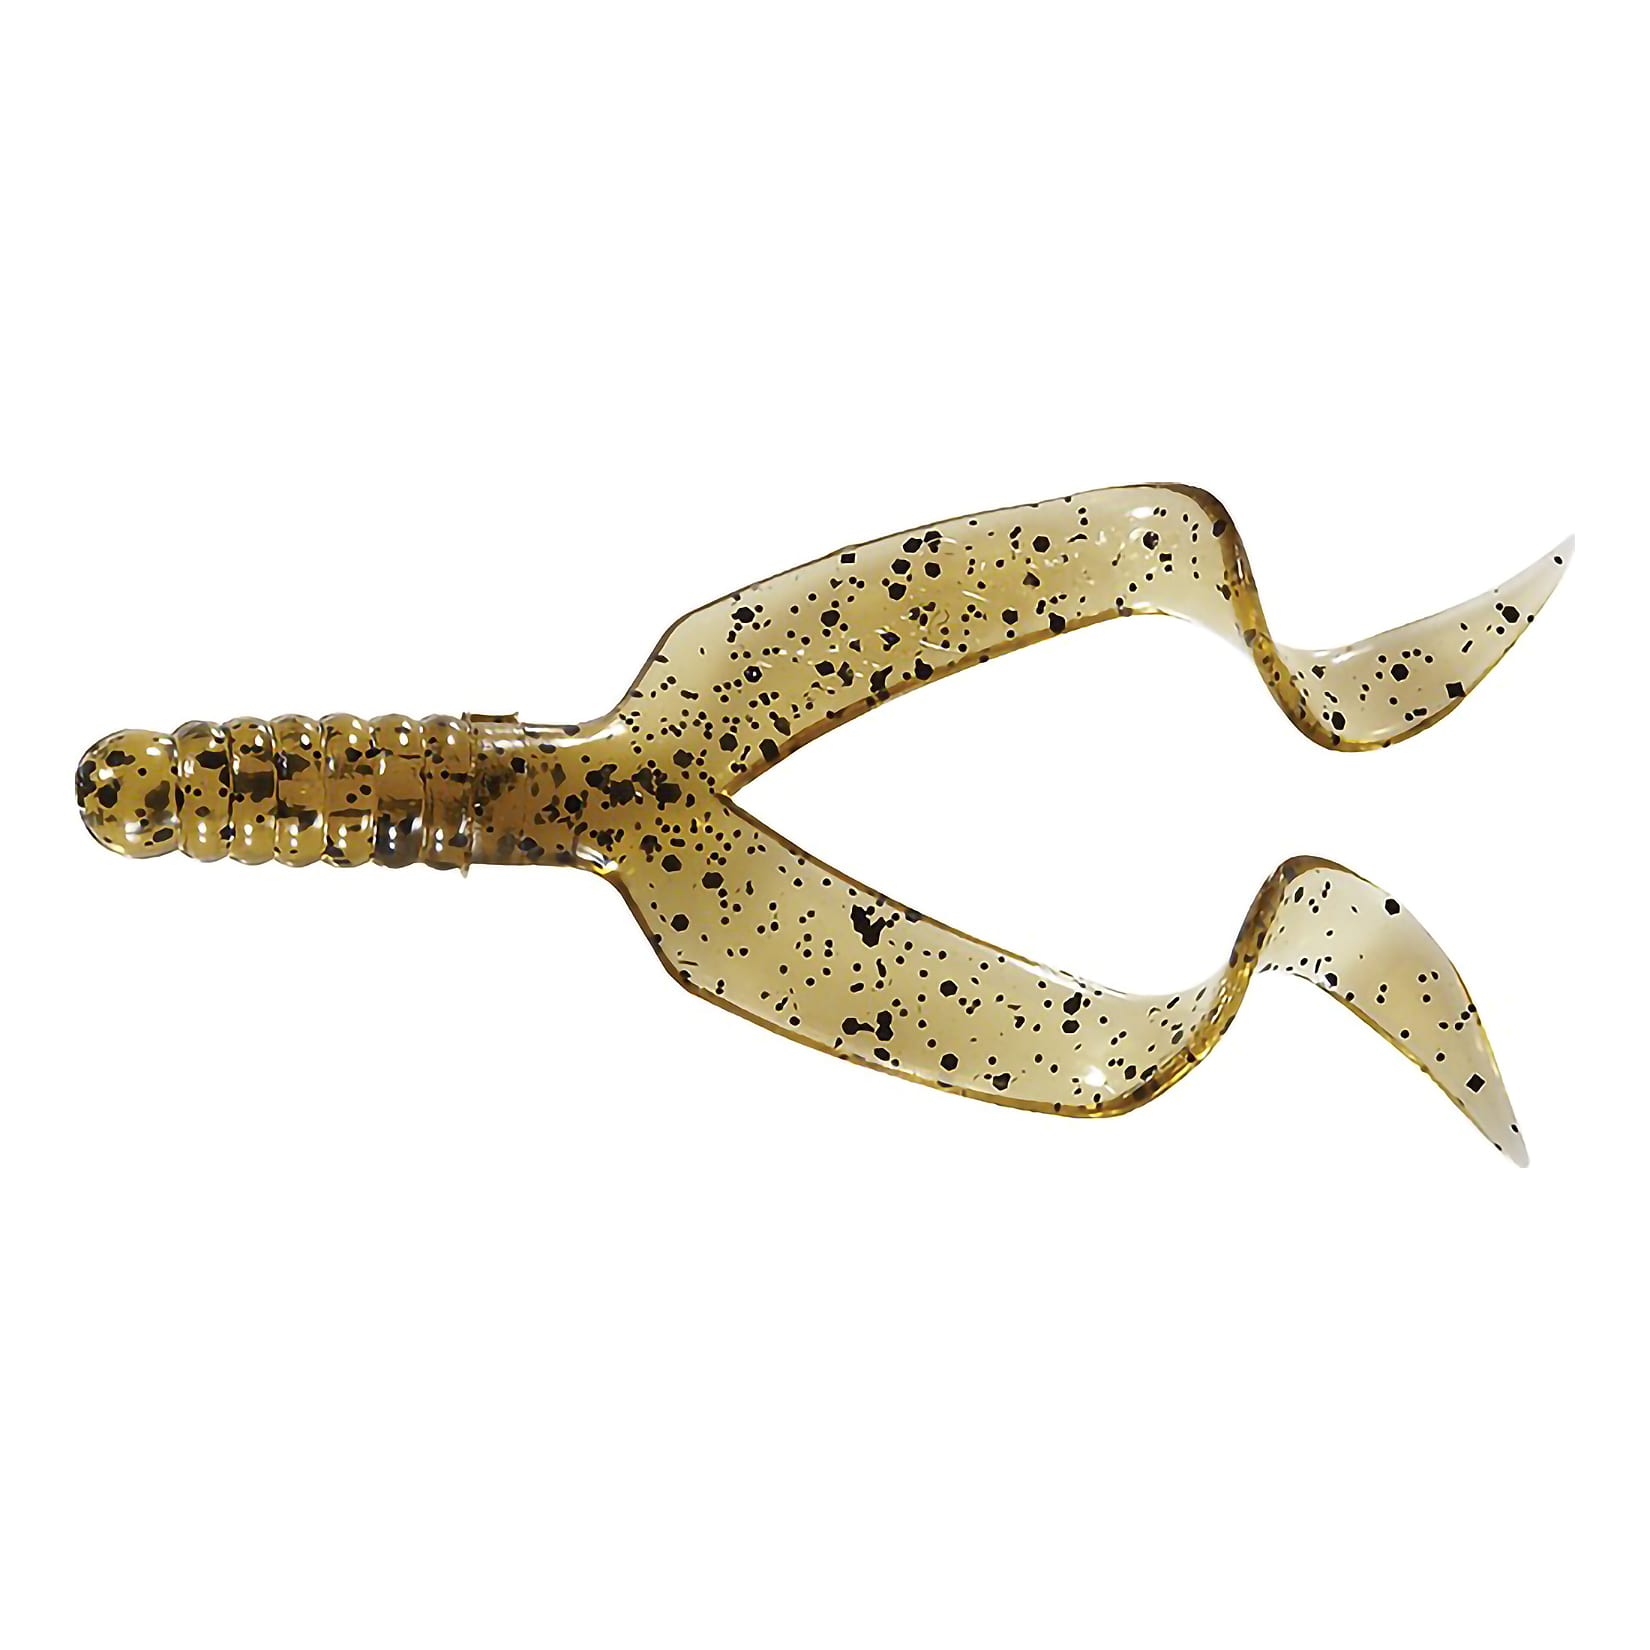 Mr. Twister Double Tail Lure – 10 Pack - Pumpkin Pepper